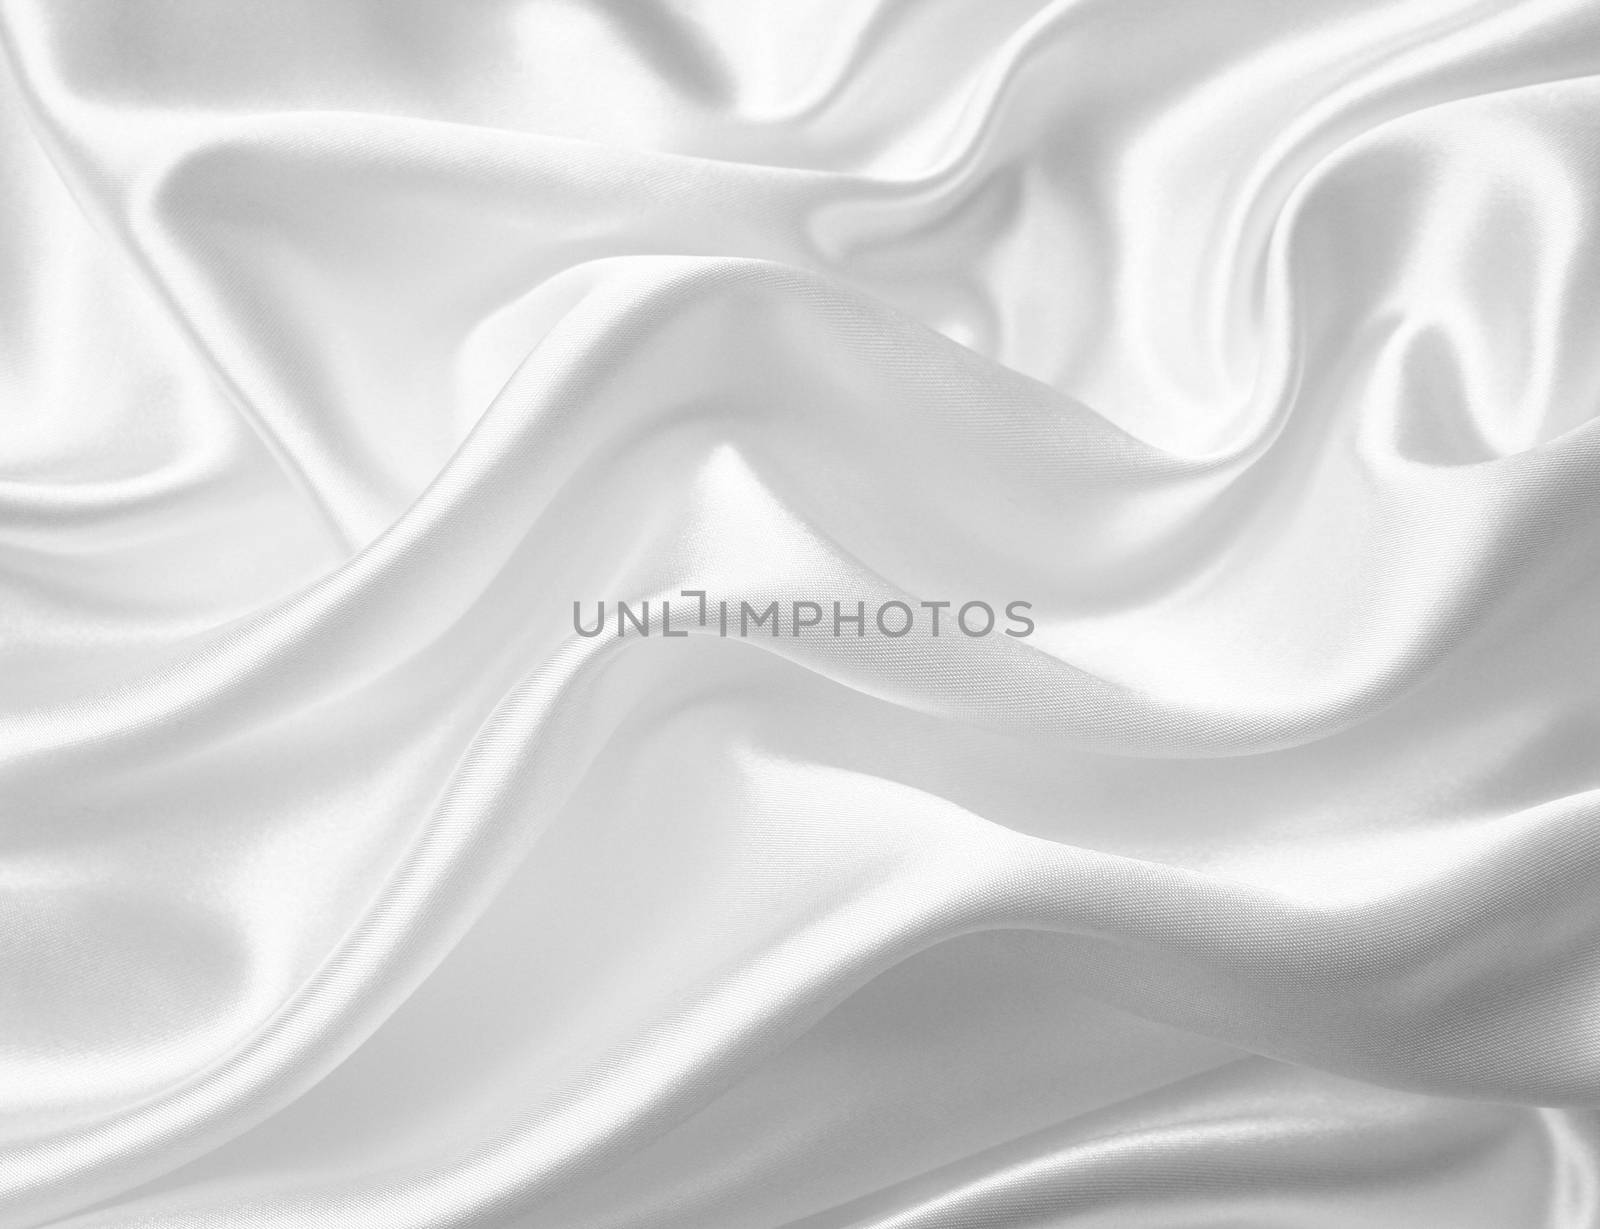 Smooth elegant white silk or satin can use as background